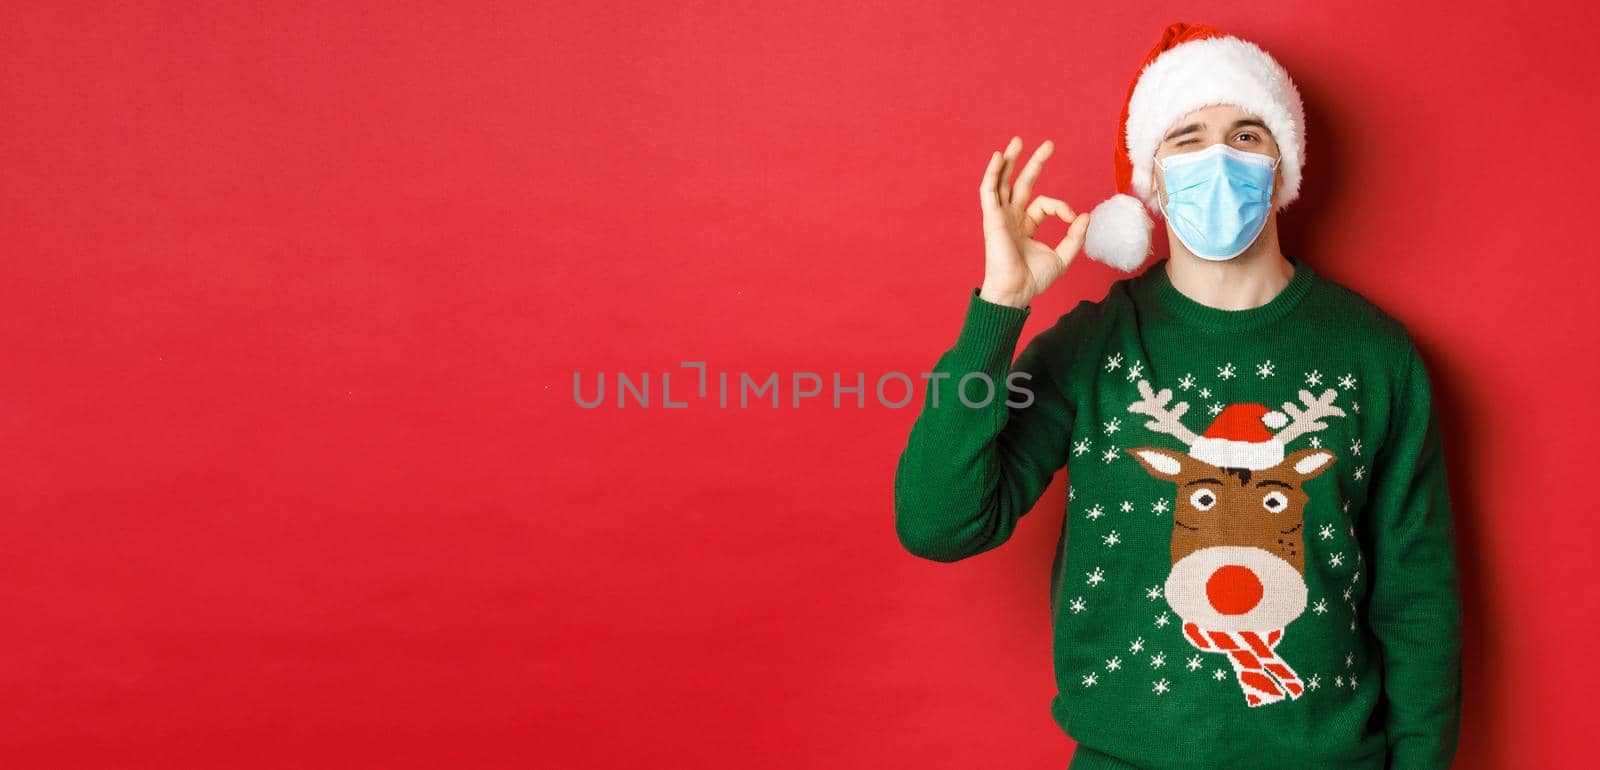 Concept of new year, covid-19 and social distancing. Cheerful man in medical mask and santa hat, showing okay sign, recommending something good, standing over red background.